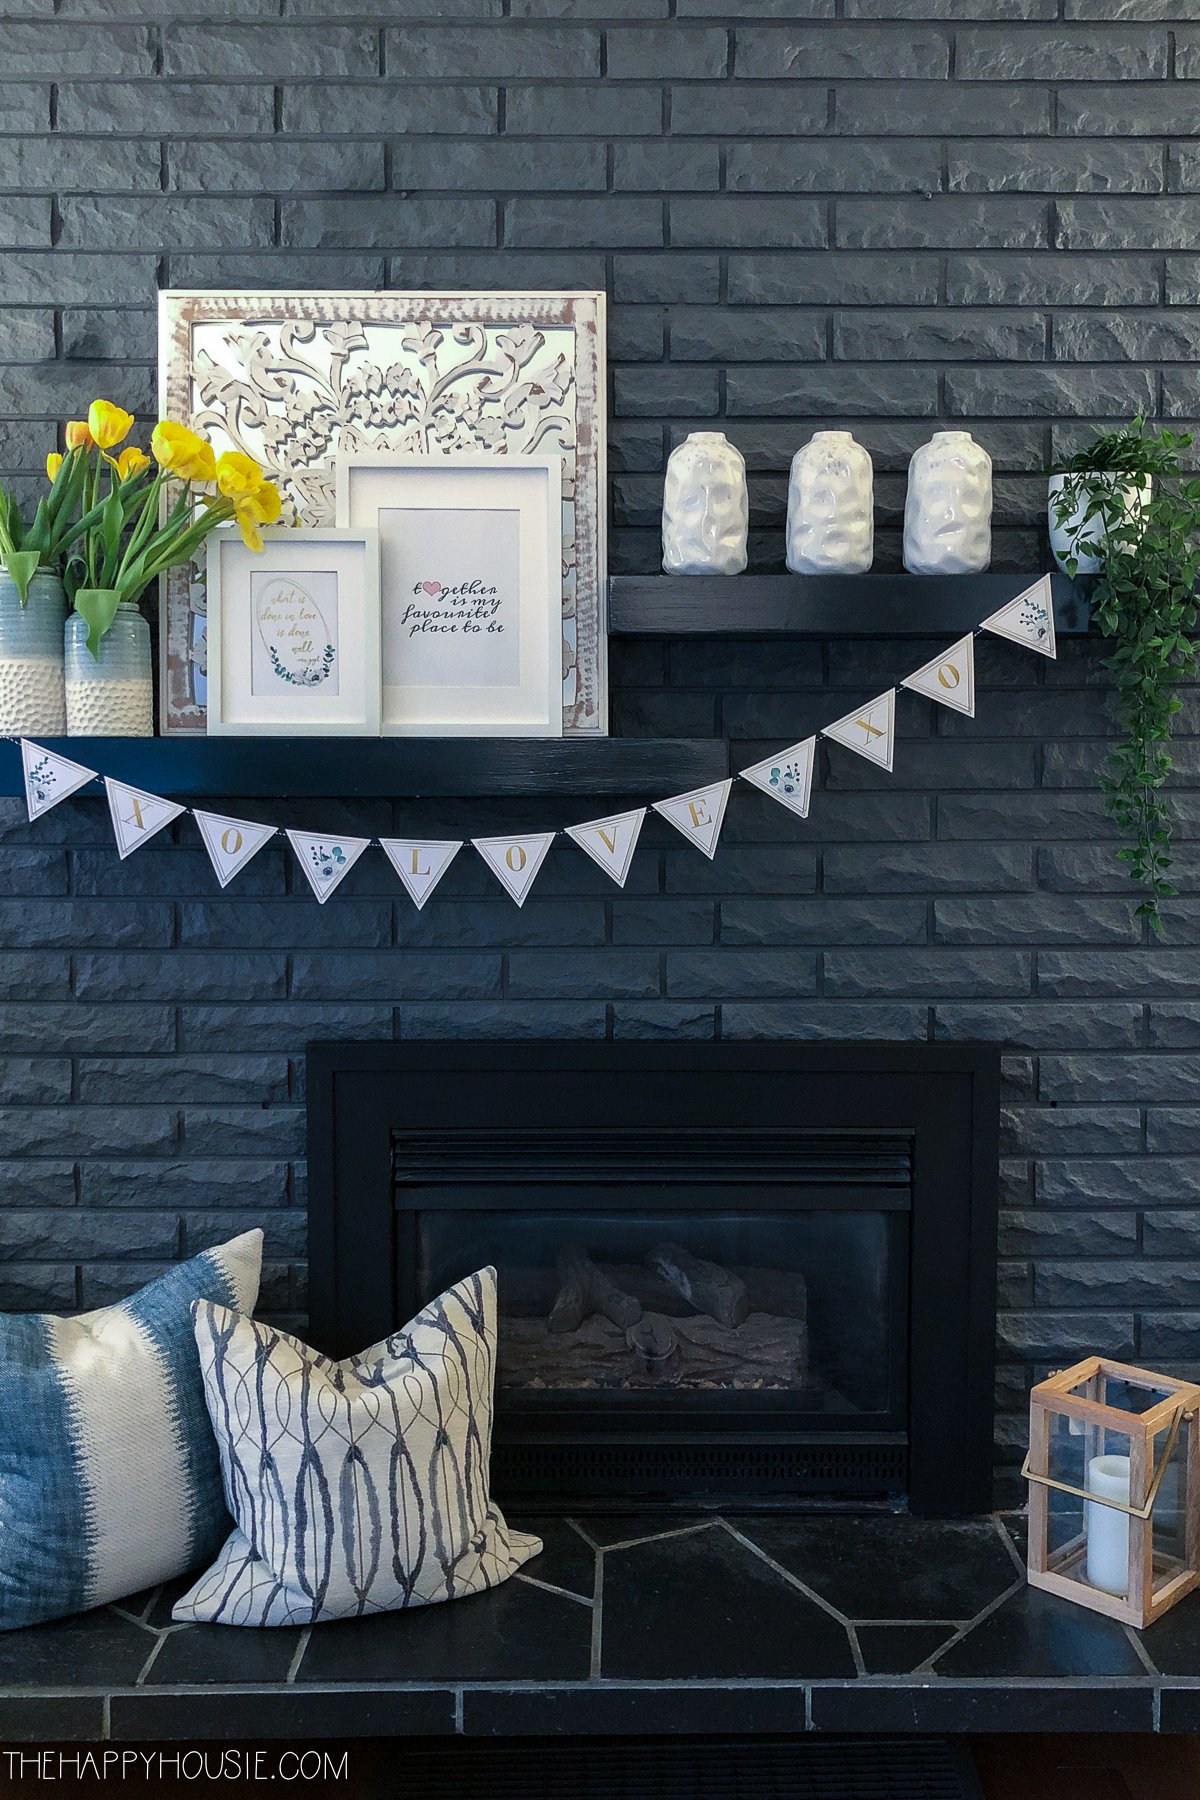 The printable and banner on the fireplace.